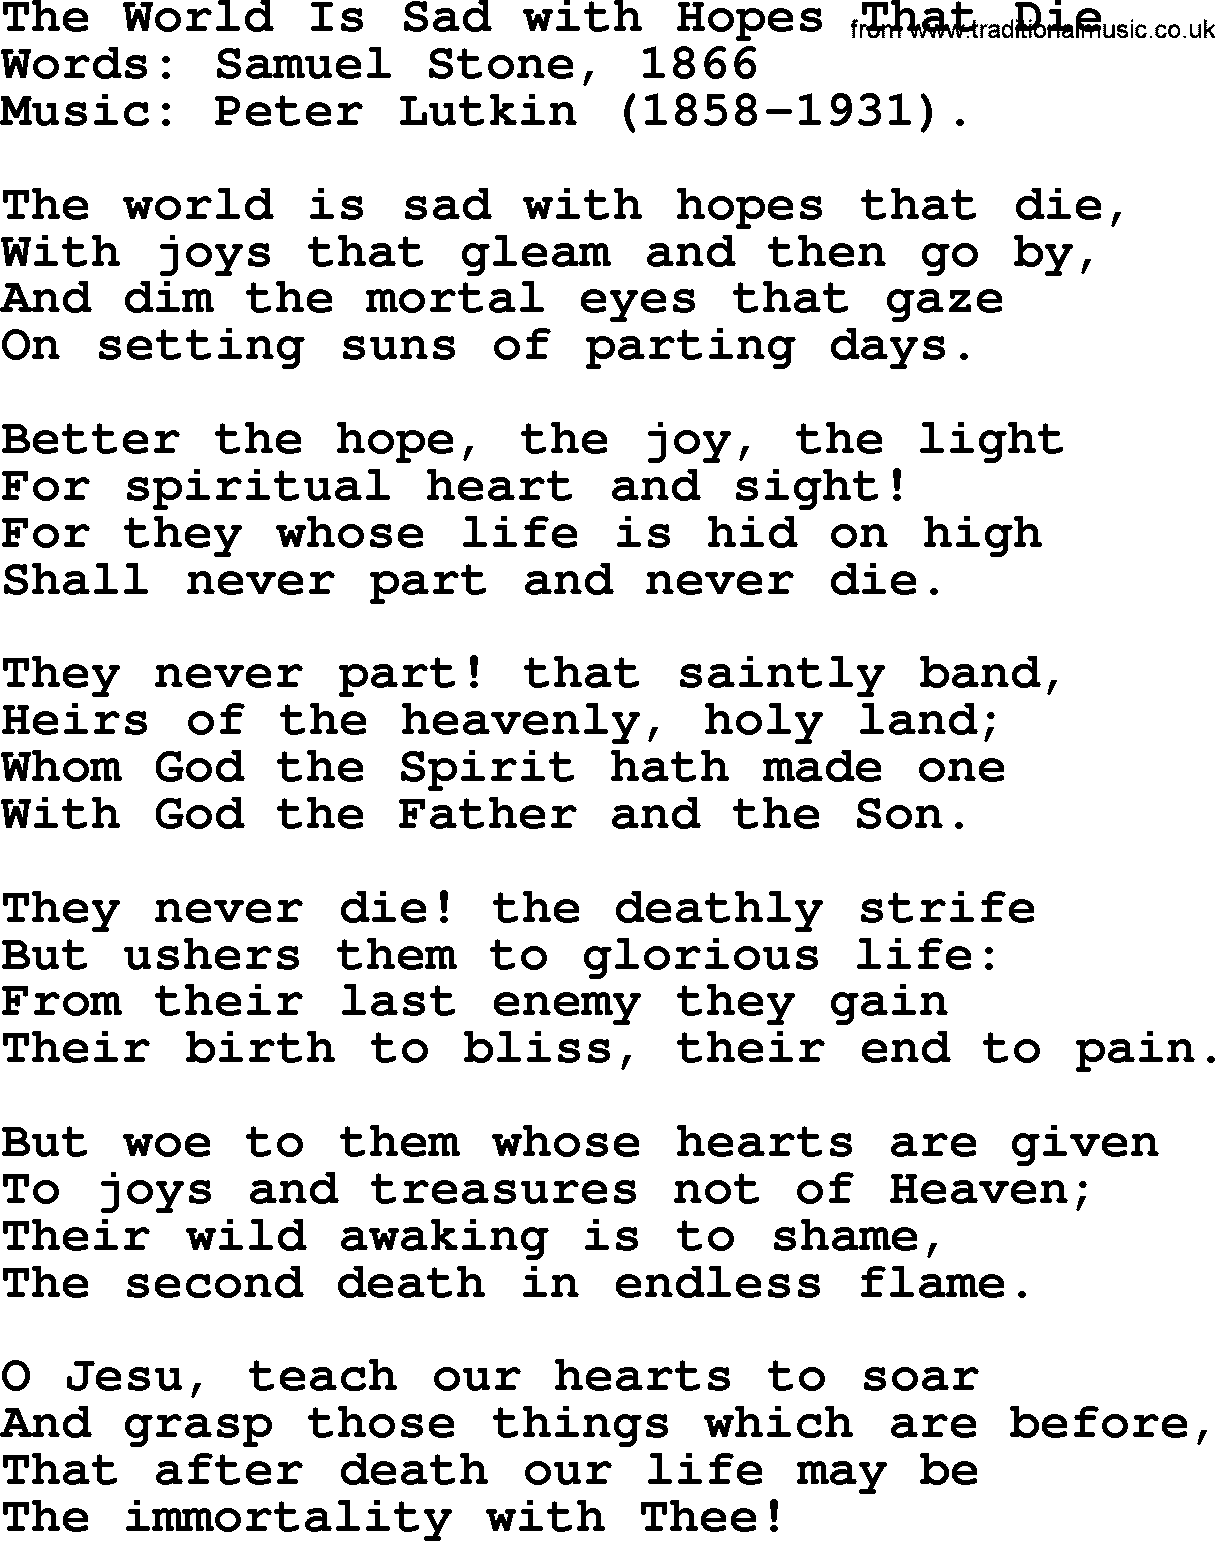 Songs and Hymns about Heaven: The World Is Sad With Hopes That Die lyrics with PDF